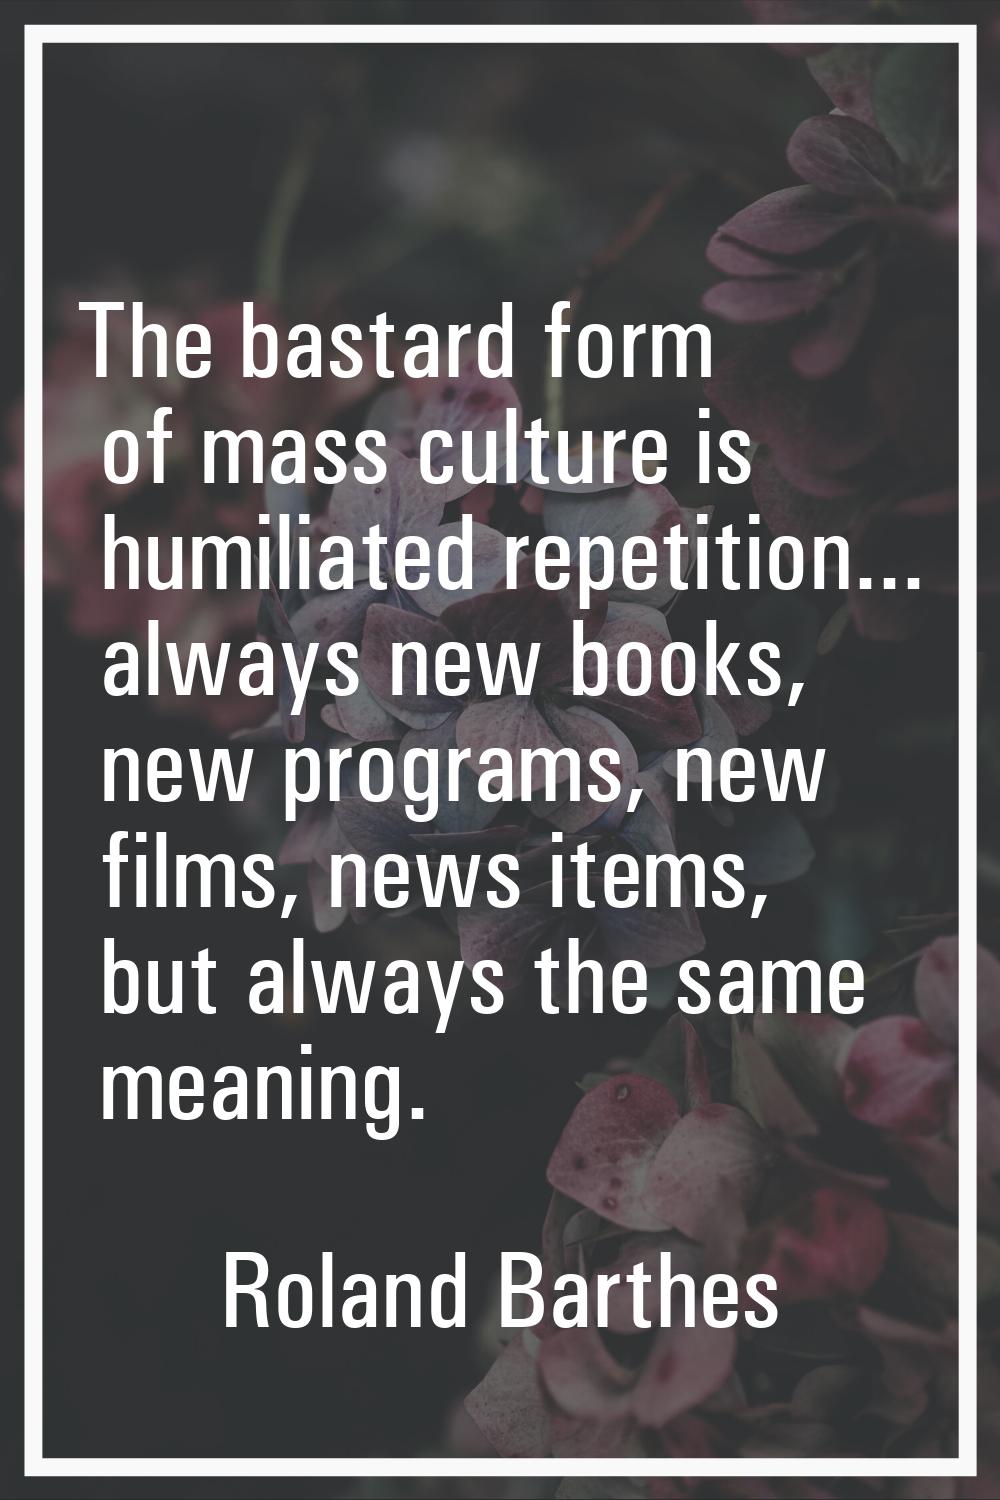 The bastard form of mass culture is humiliated repetition... always new books, new programs, new fi